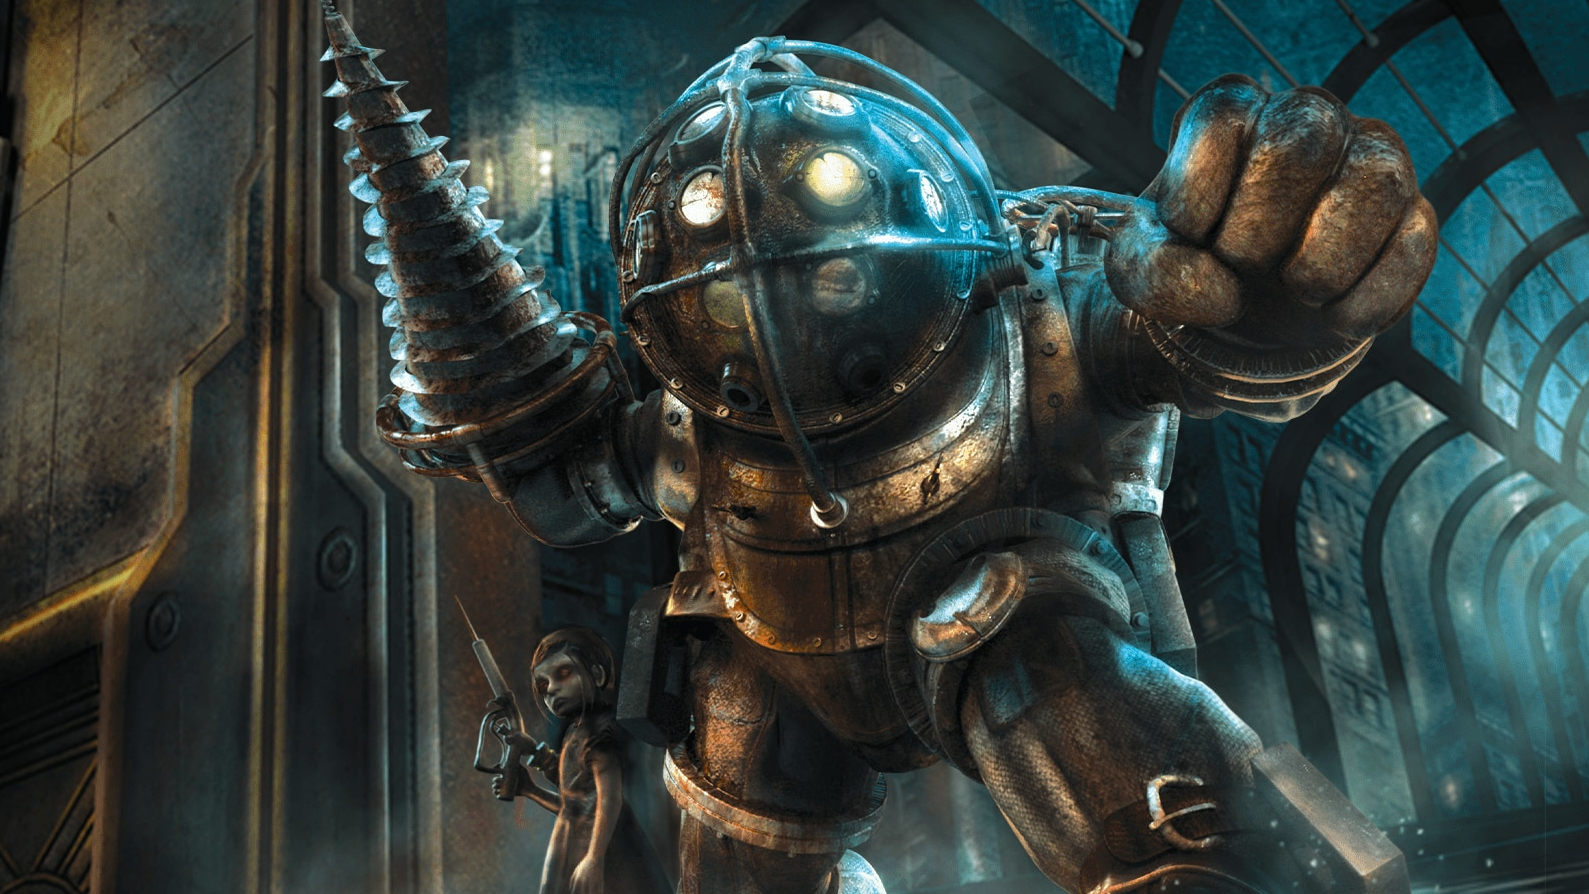 bioshock-4-will-only-be-available-on-one-console